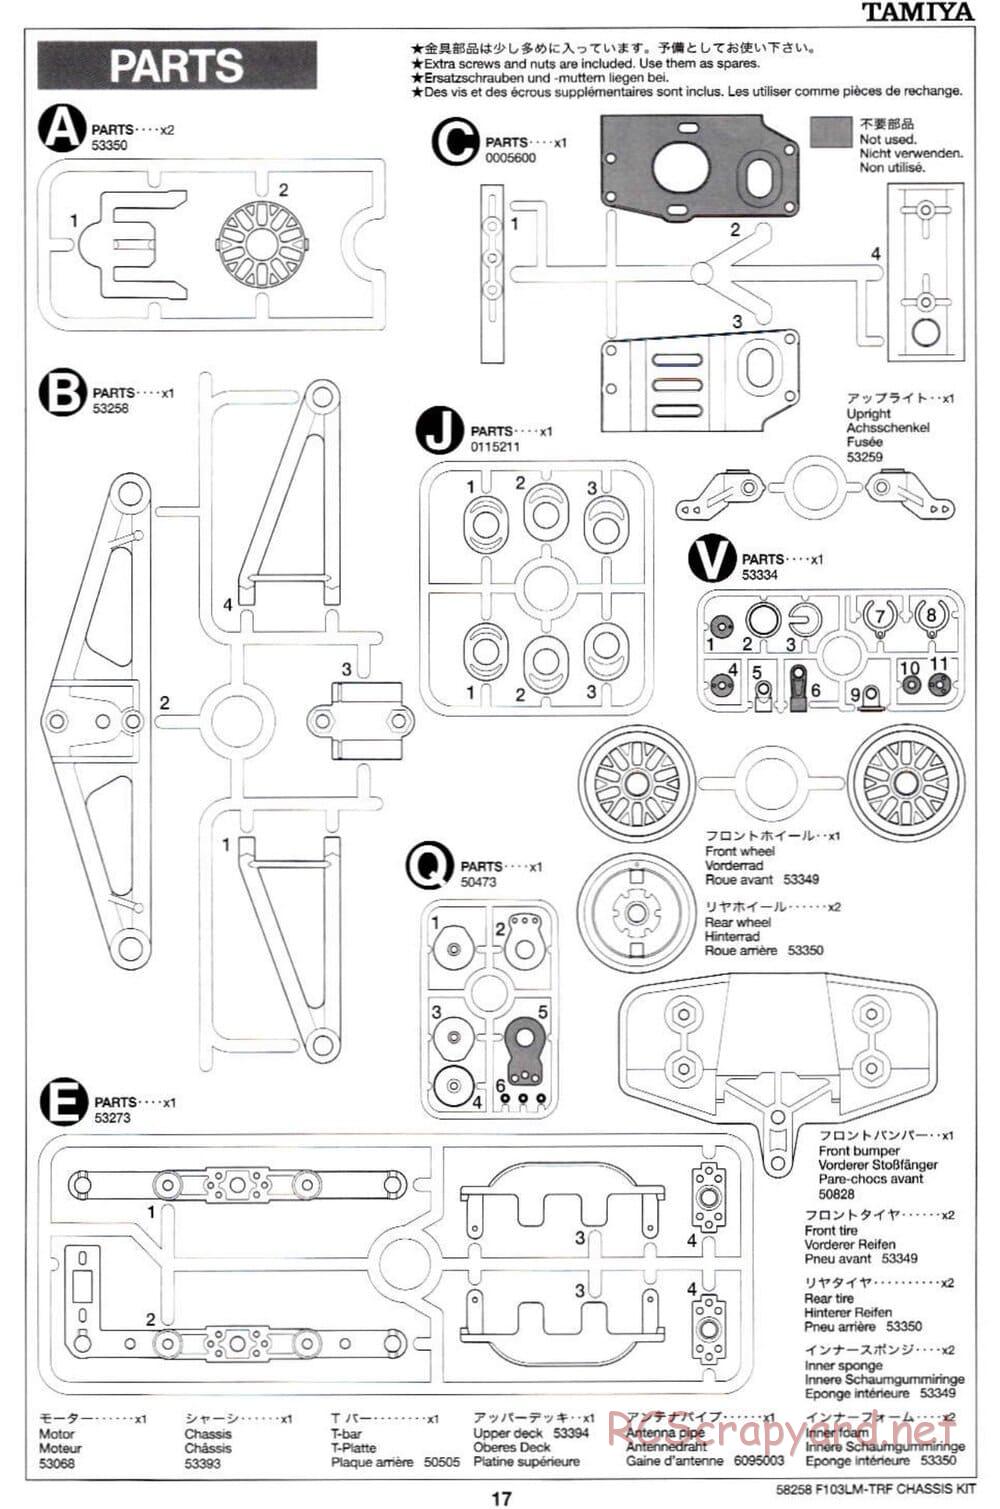 Tamiya - F103LM TRF Special Chassis - Manual - Page 17